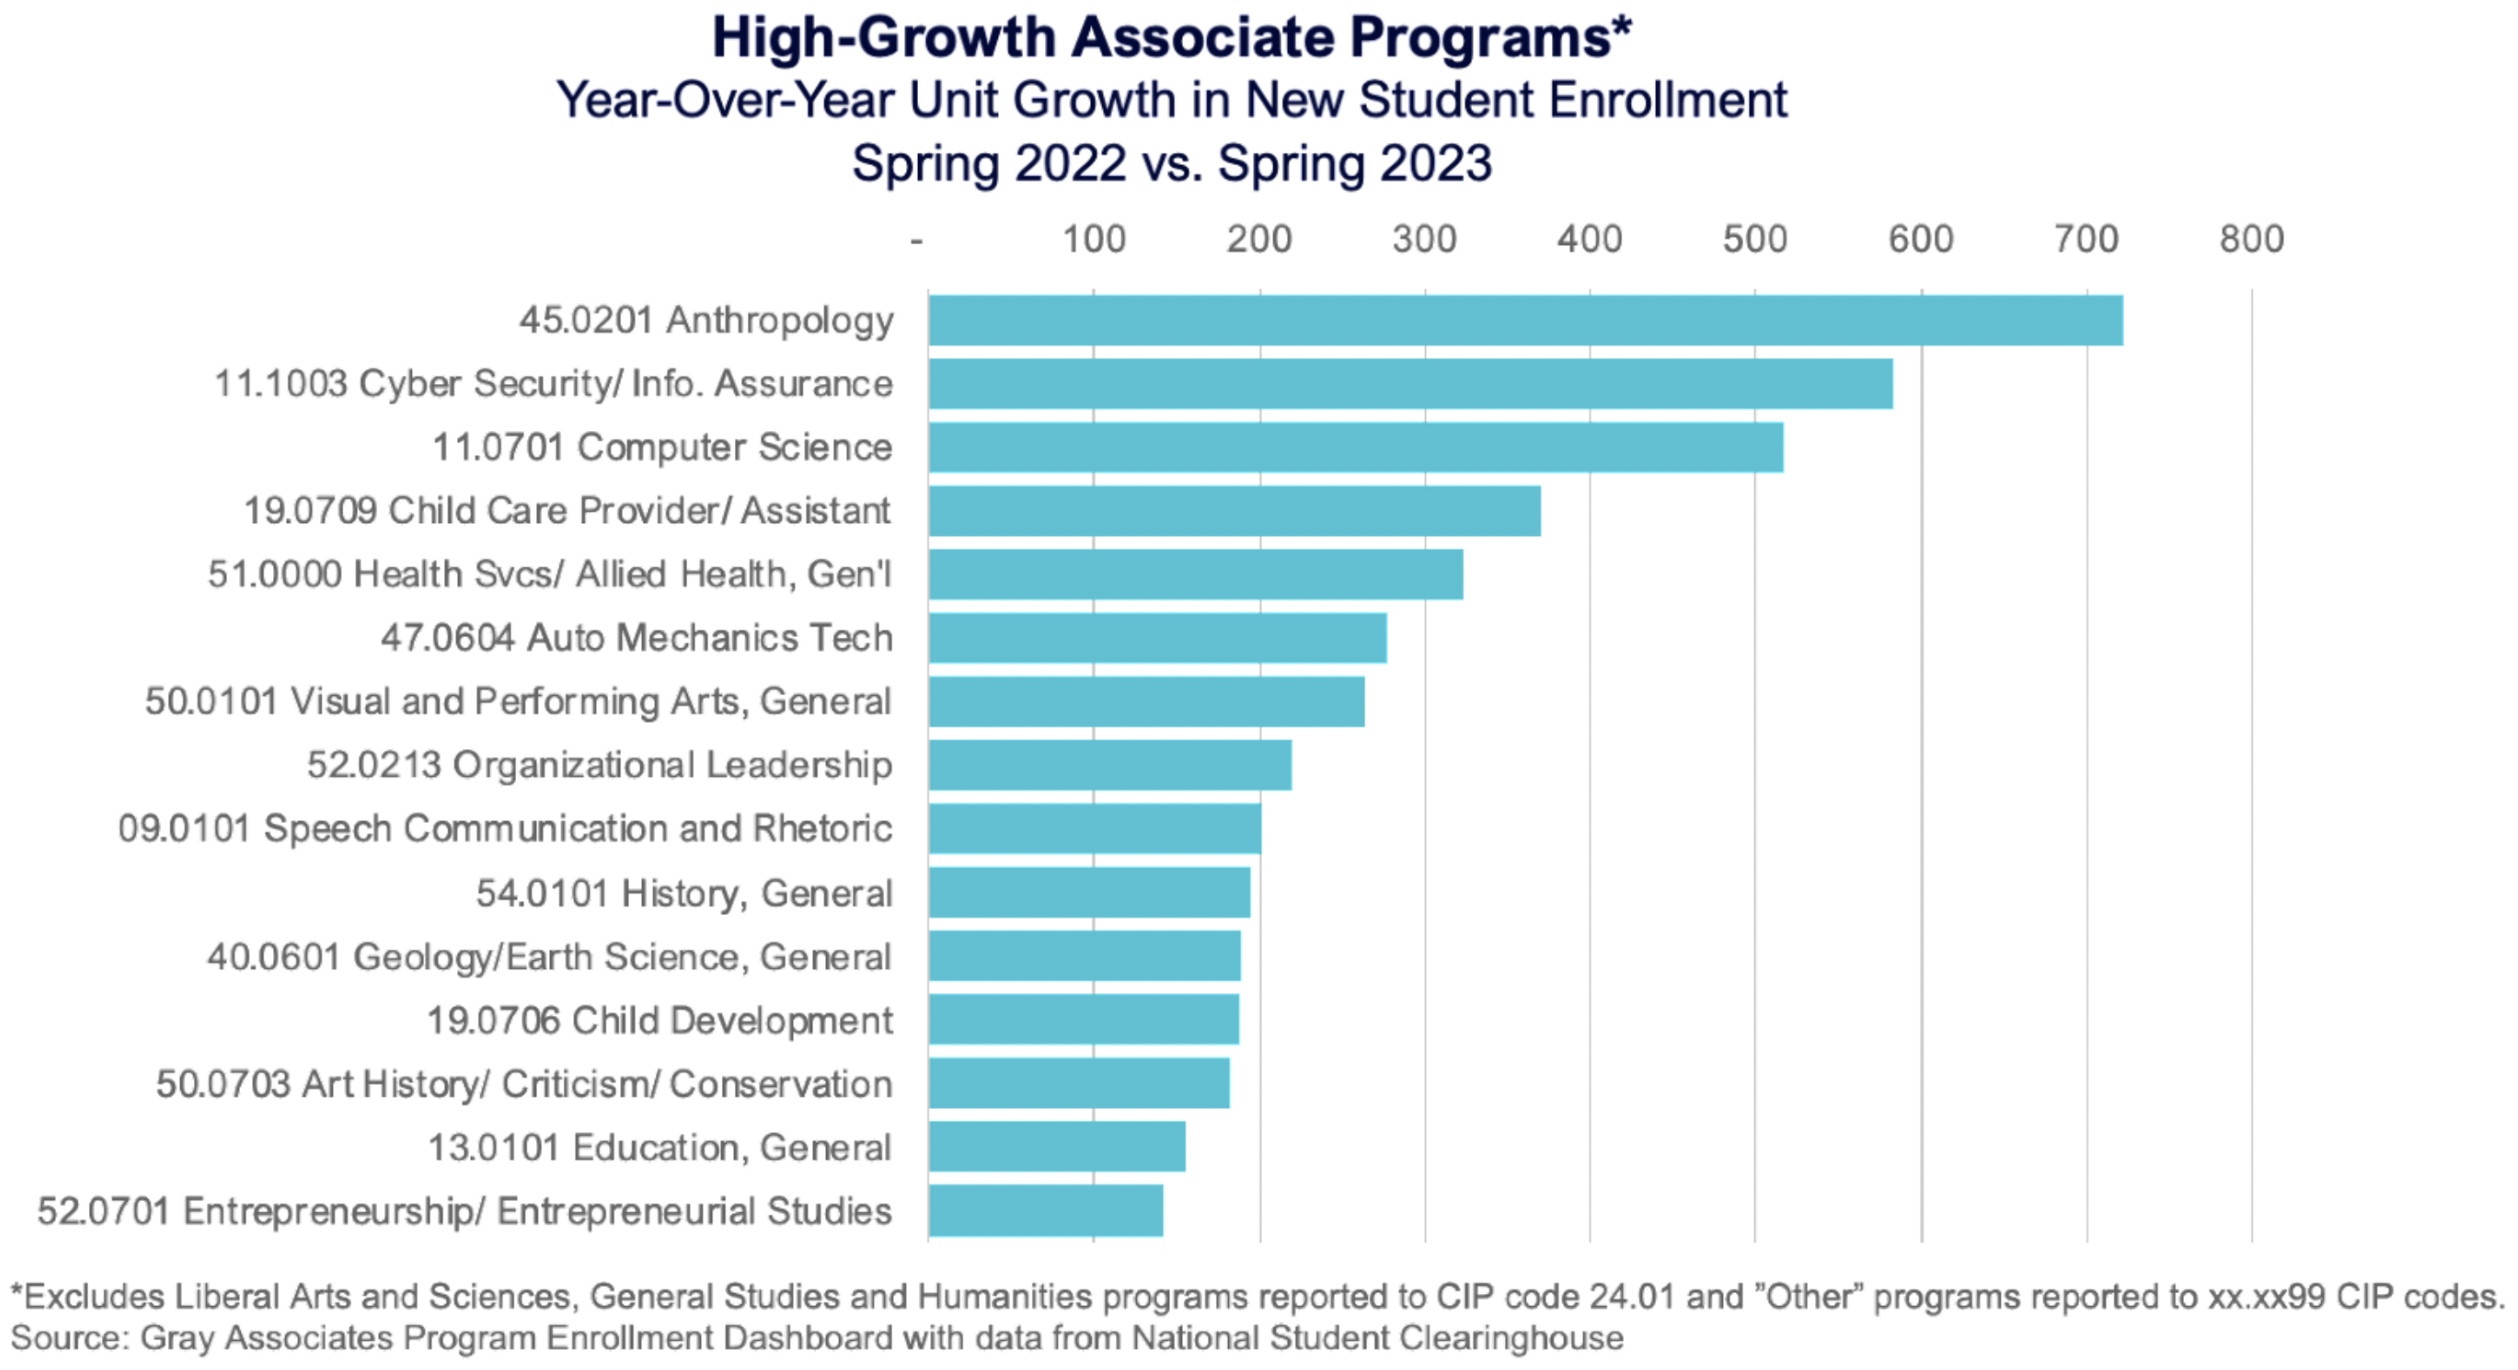 High-Growth Associate programs* (YoY Unit Growth in New Student Enrollment - Spring 2022 vs. Spring 2023)